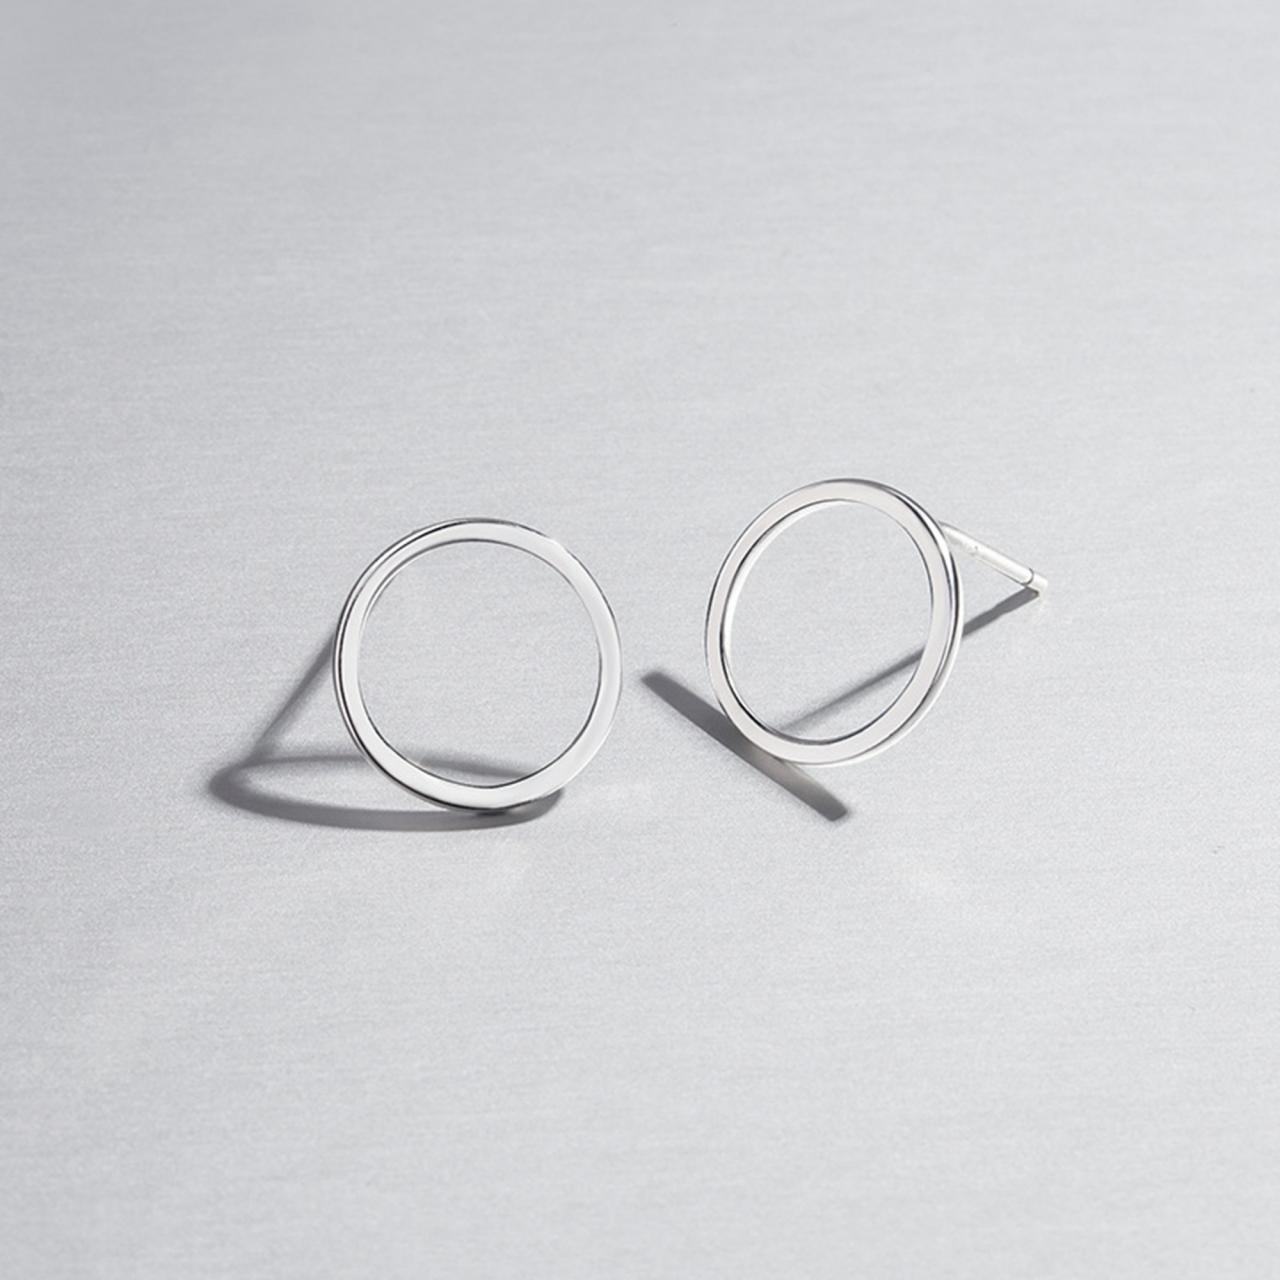 S925 Silver Round Circle Earrings, Hollow Round Ear Stud, Geometric Ear Post, Polished Ear Stud